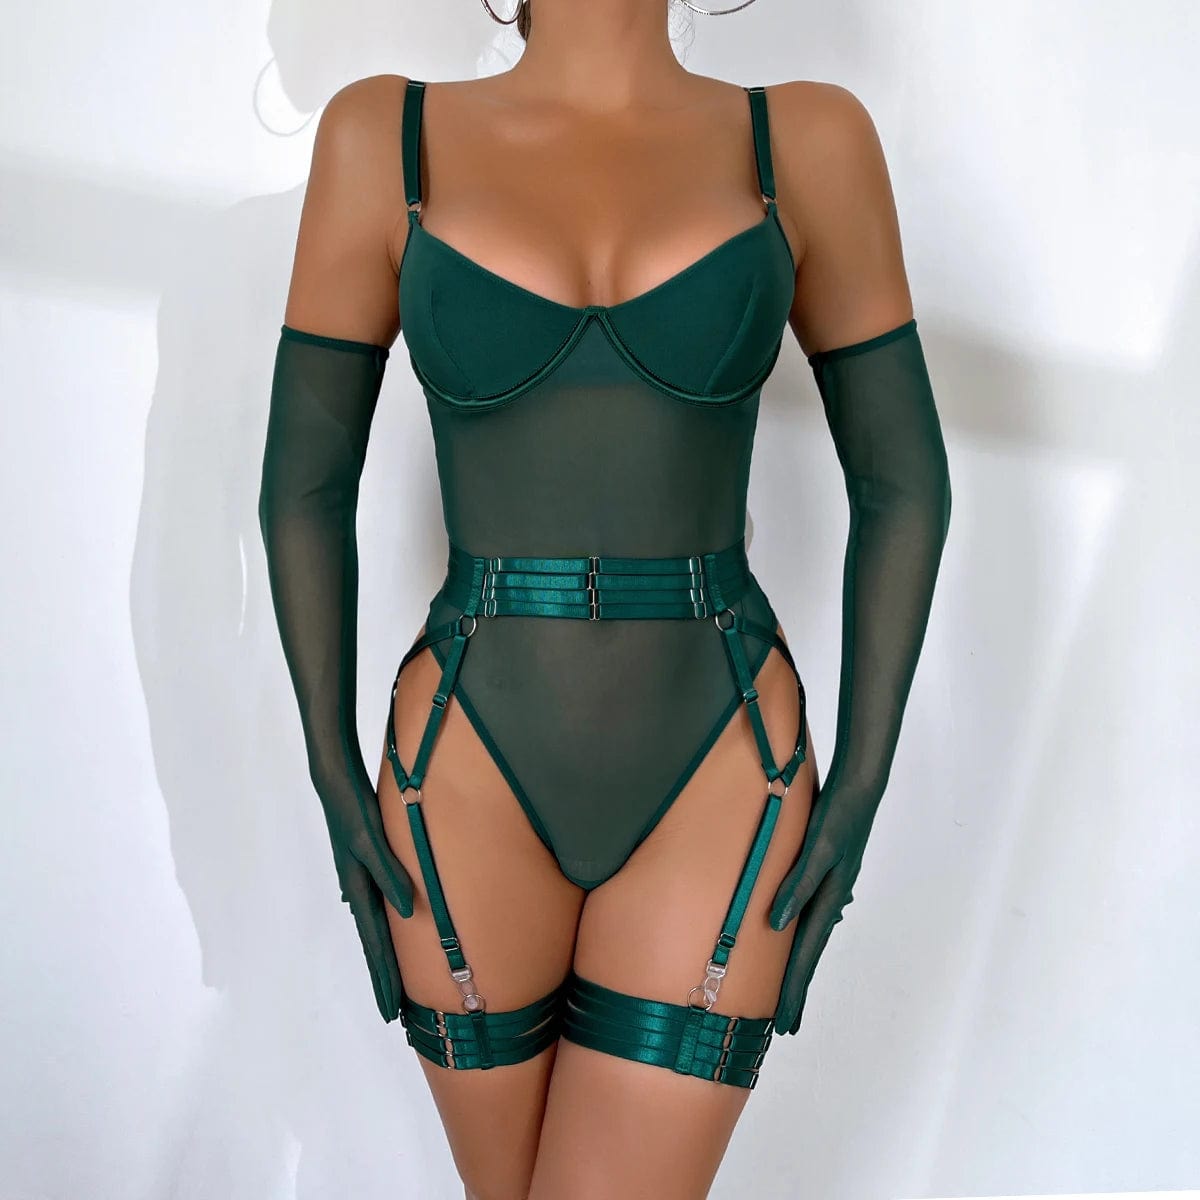 Kinky Cloth Mesh Bodysuit with Gloves